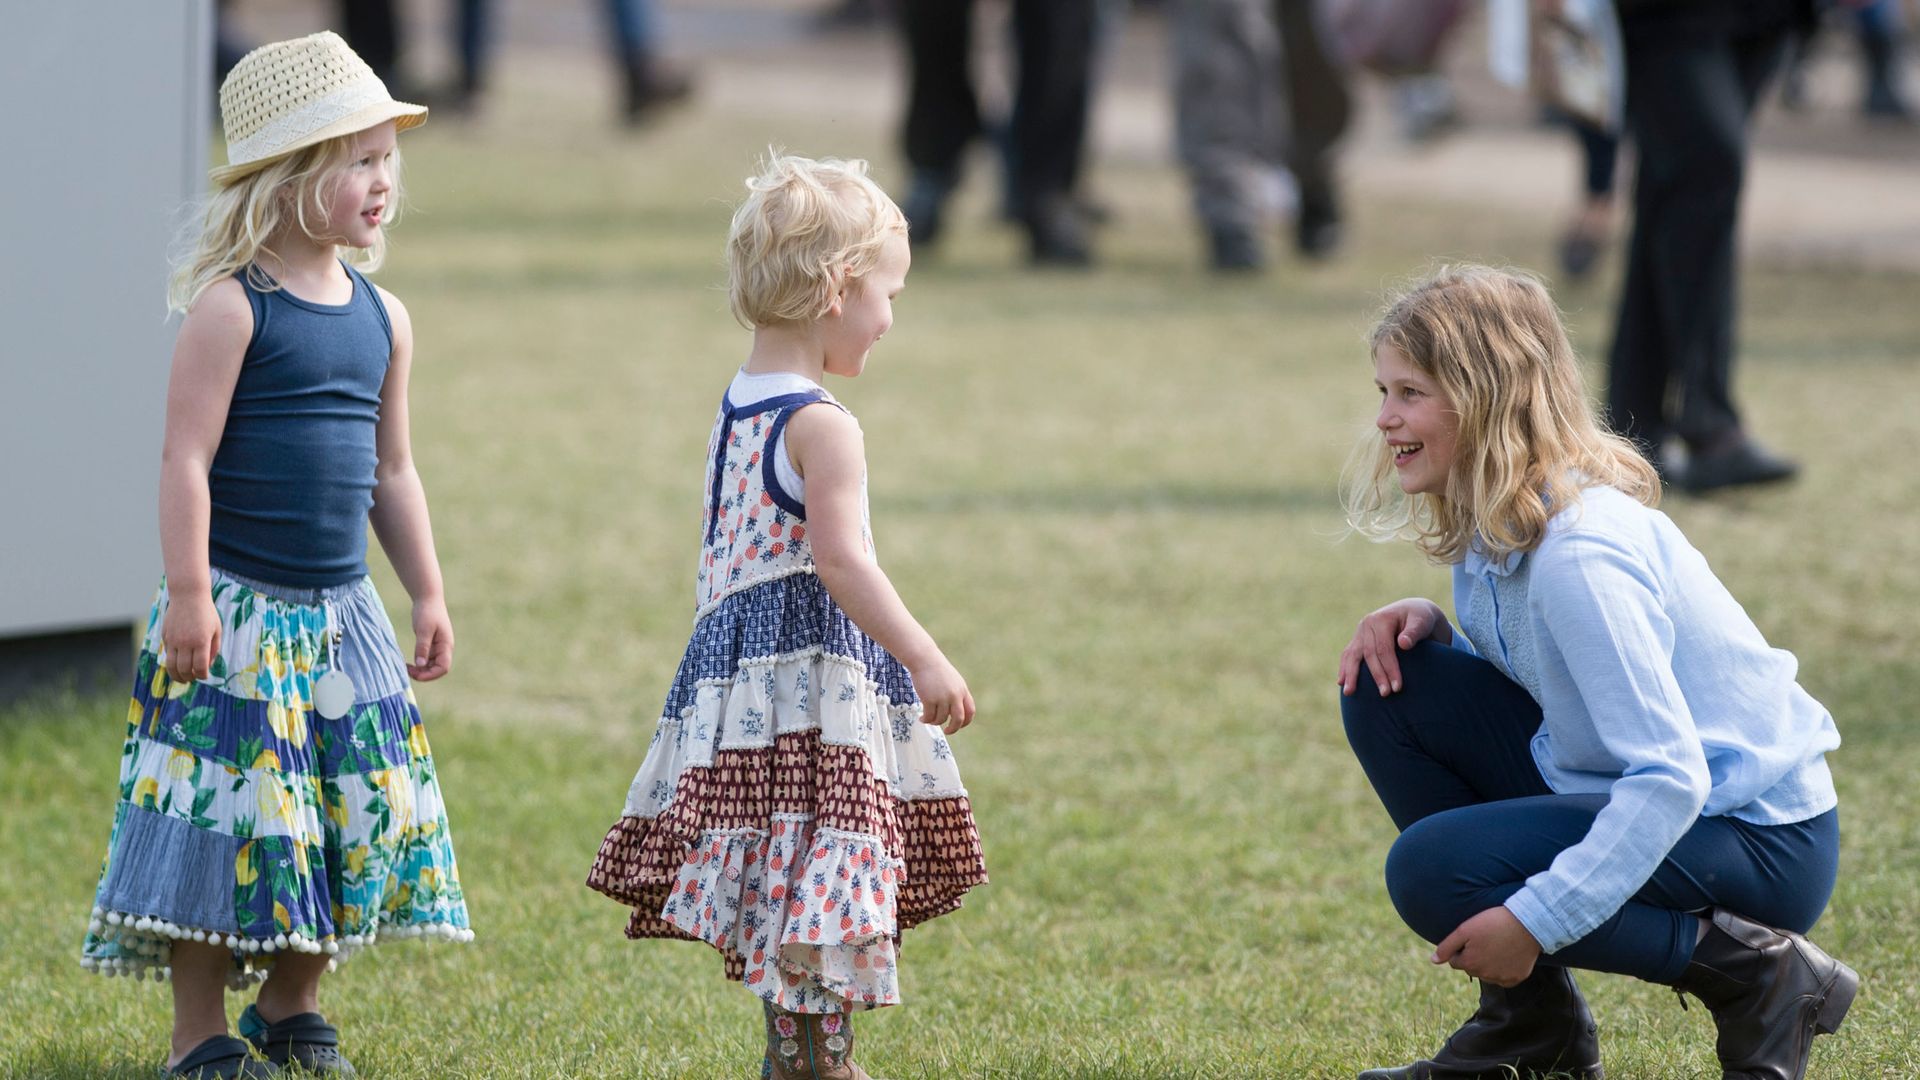 Lady Louise Windsor playing with Isla Phillips and Savannah Phillips at the Royal Windsor Horse show in 2015